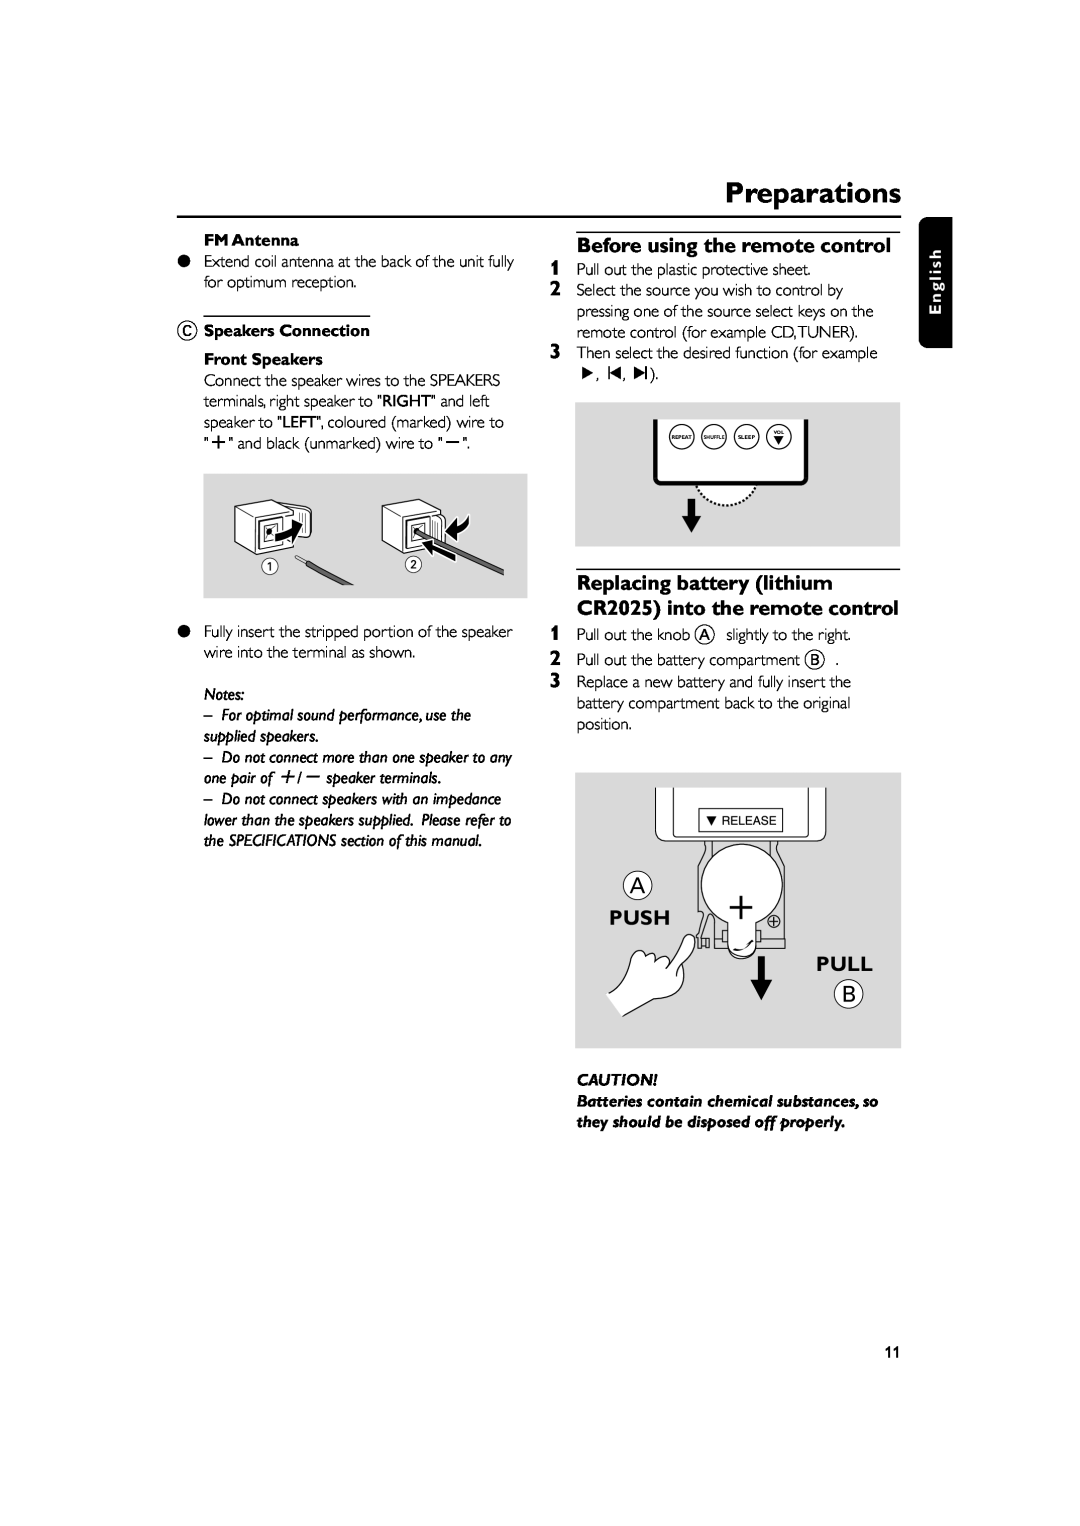 Philips MC138 owner manual Preparations, Before using the remote control, Push Pull, É, í, ë, E n g l i s h 